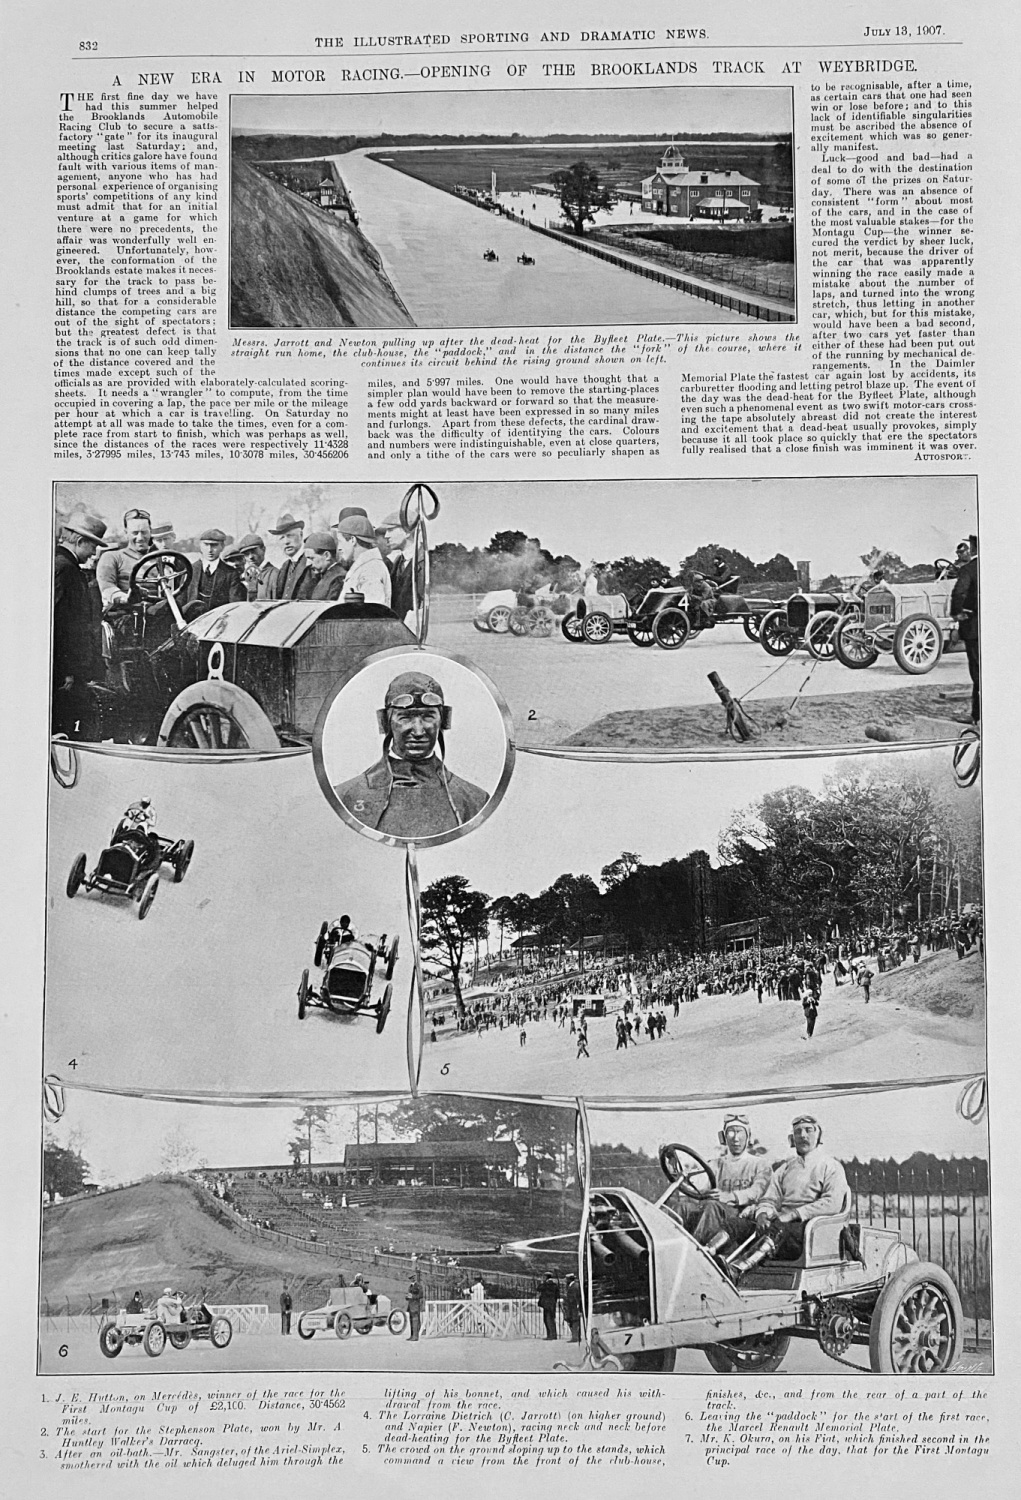 A New Era in Motor Racing.- Opening of the Brooklands Track at Weybridge.  